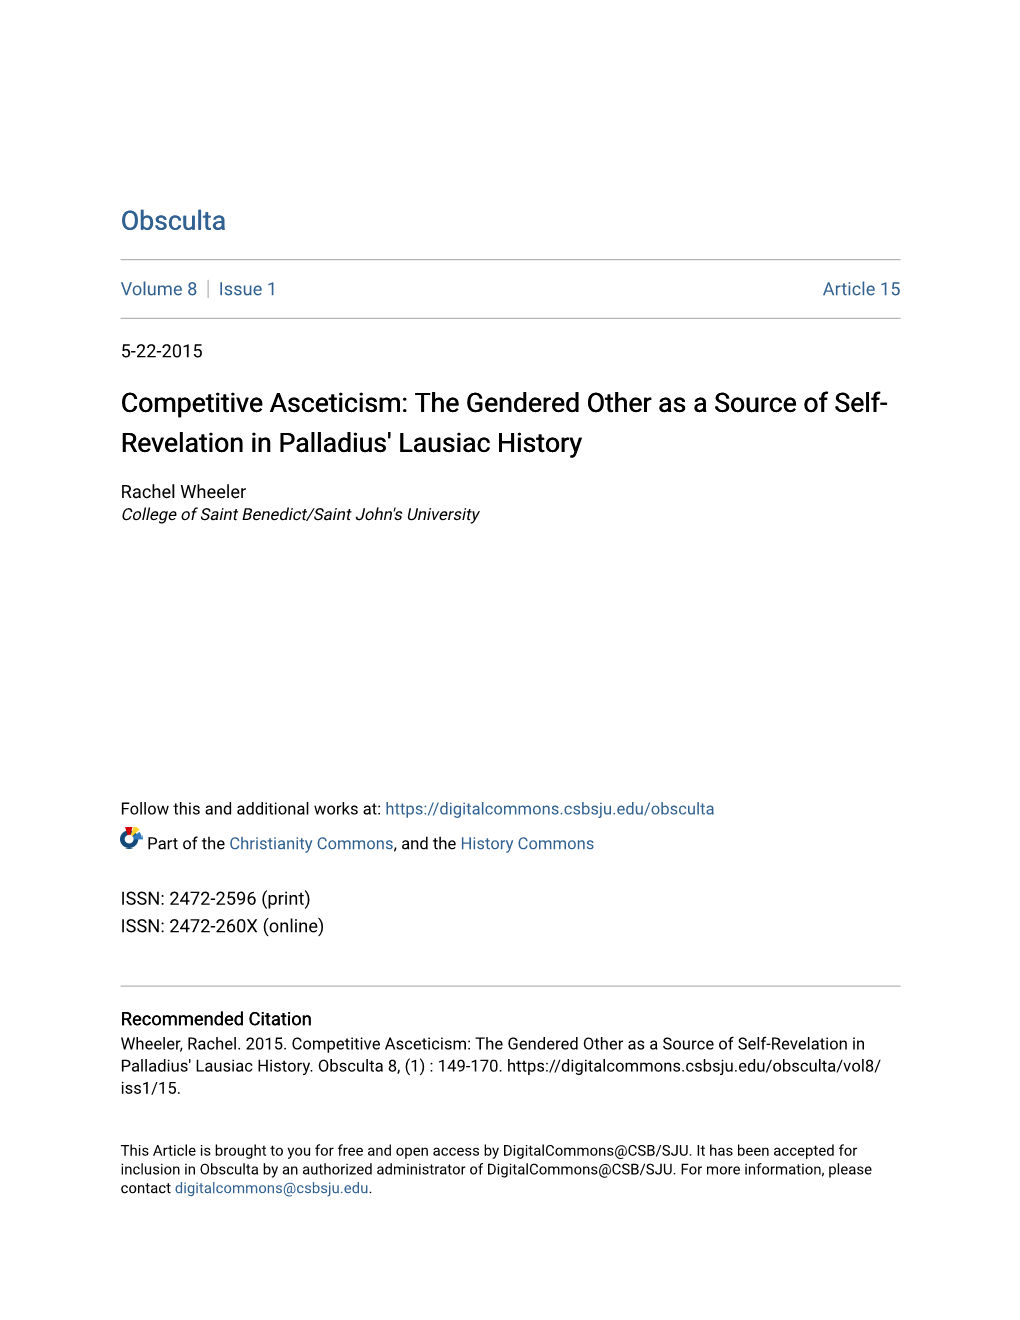 Competitive Asceticism: the Gendered Other As a Source of Self- Revelation in Palladius' Lausiac History